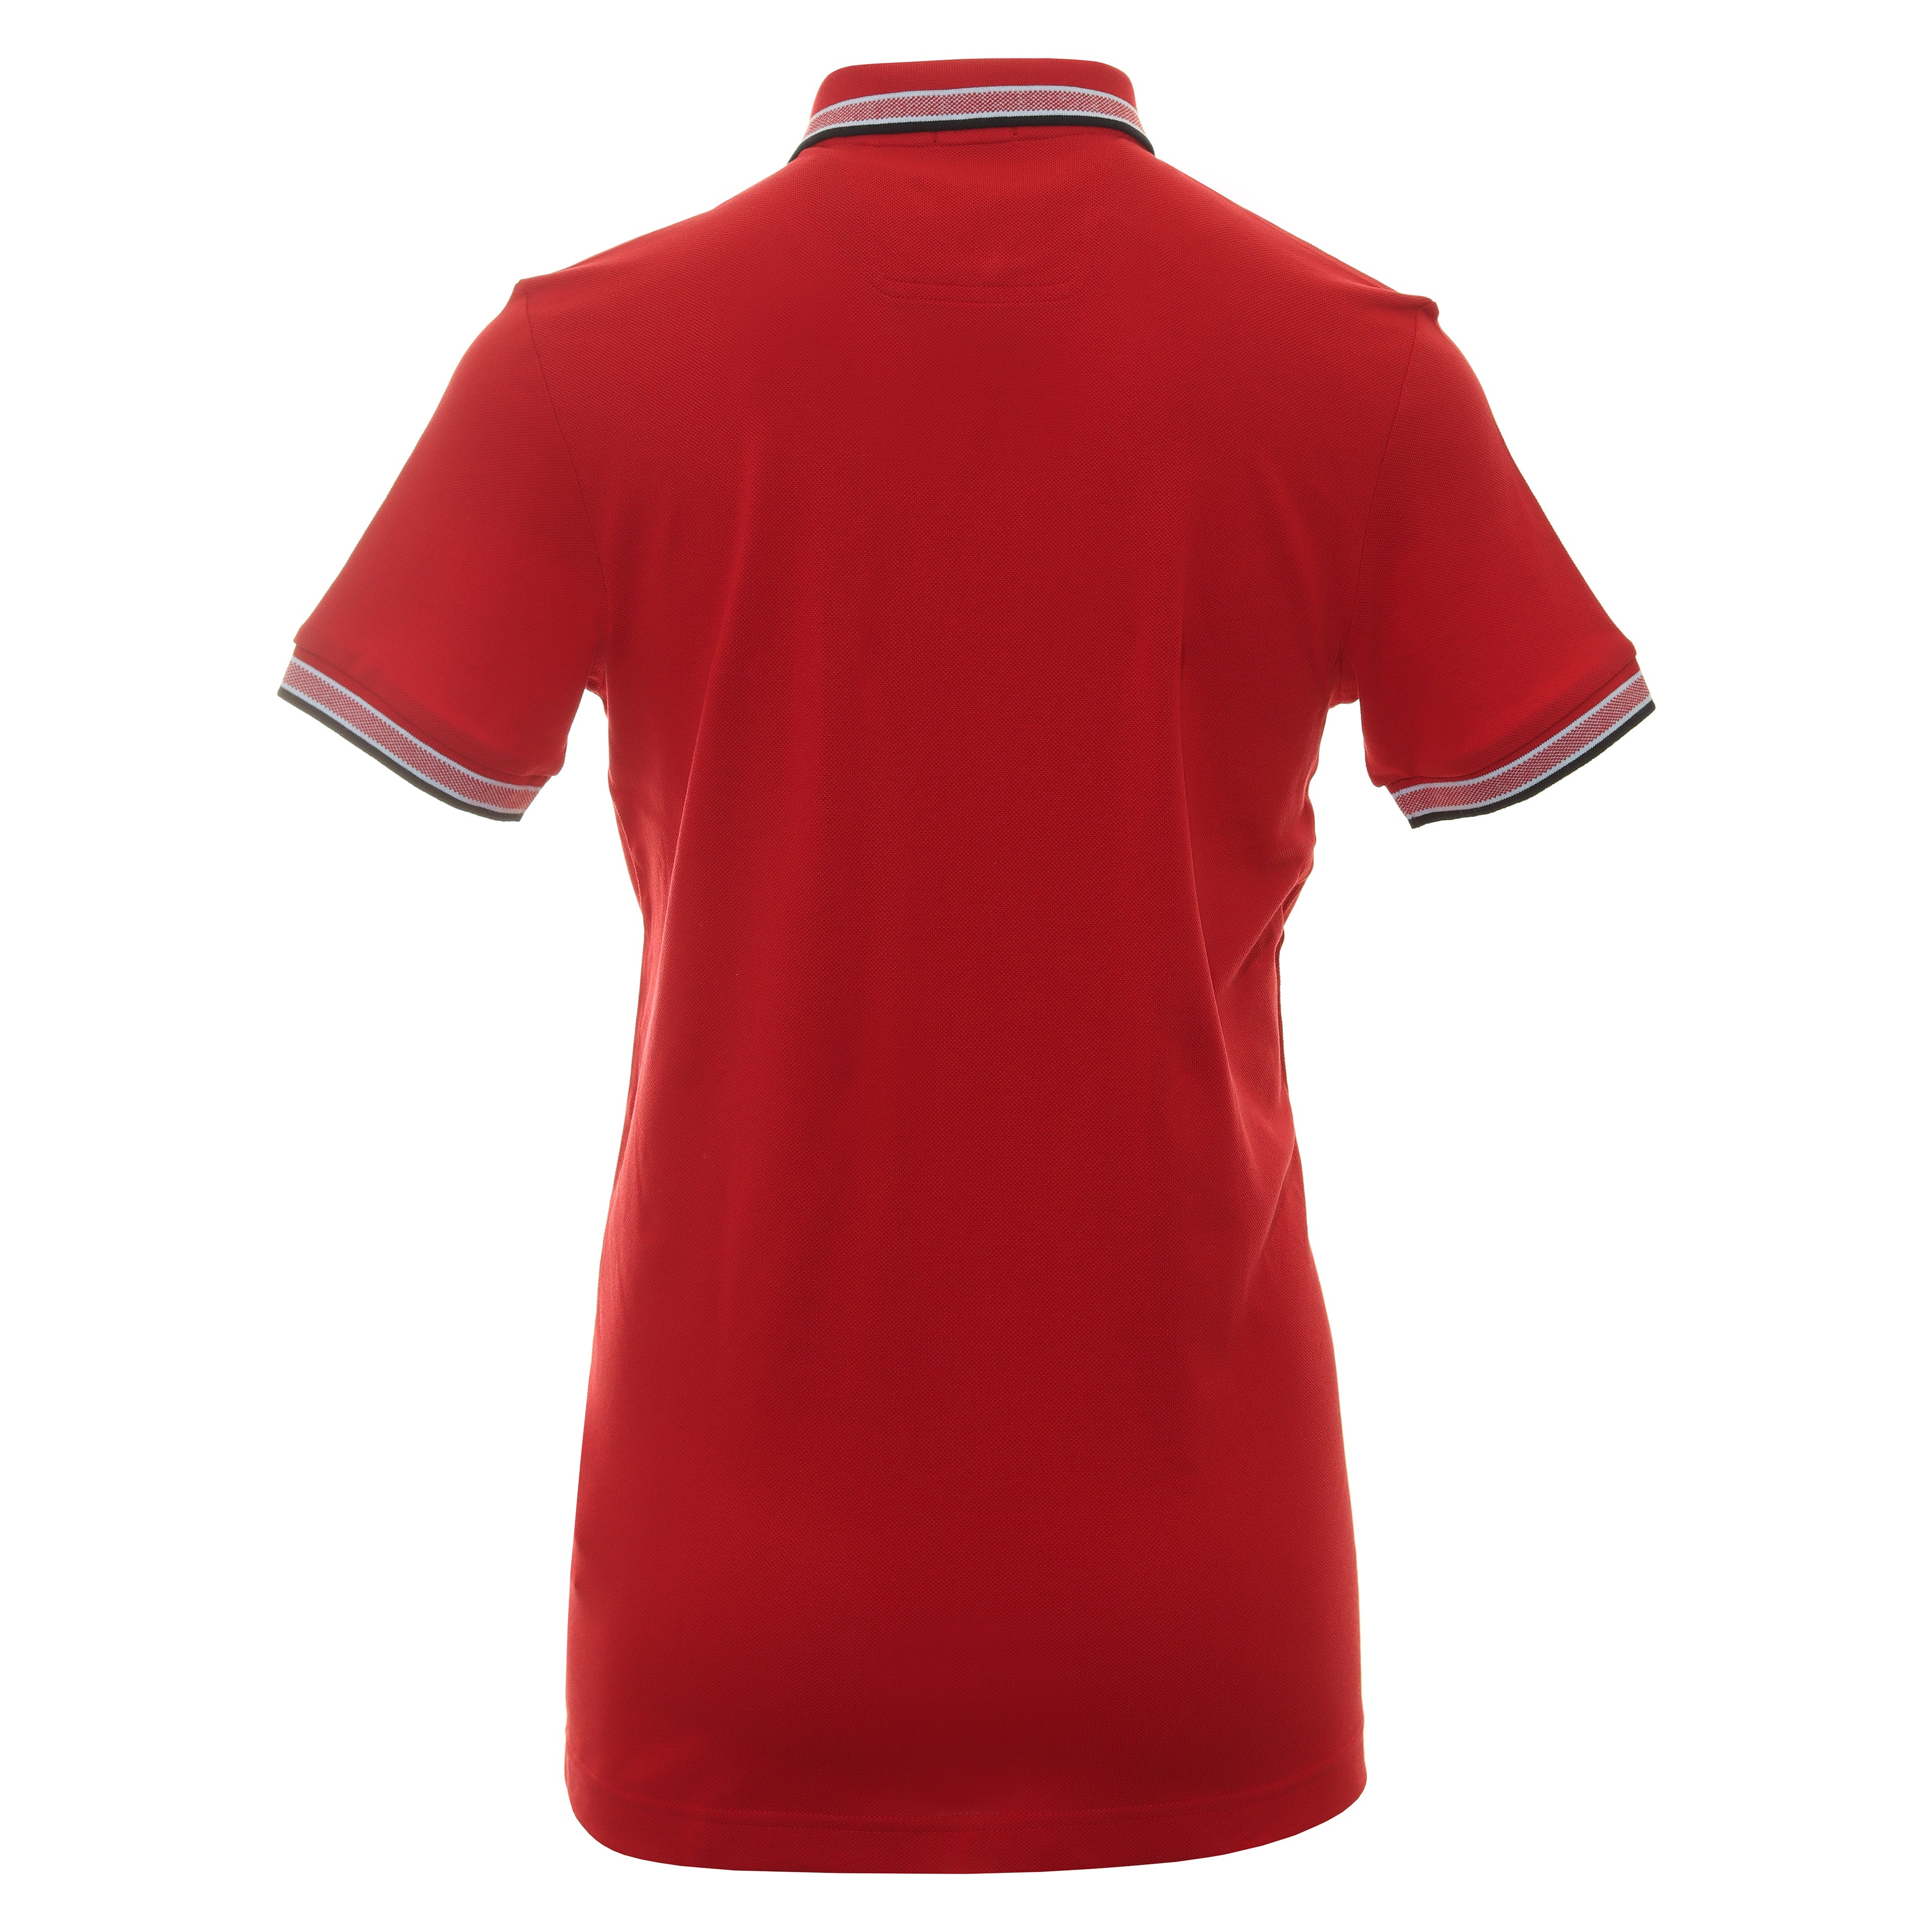 BOSS Paddy Polo Shirt 50468983 Medium Red 612 | Function18 | Restrictedgs